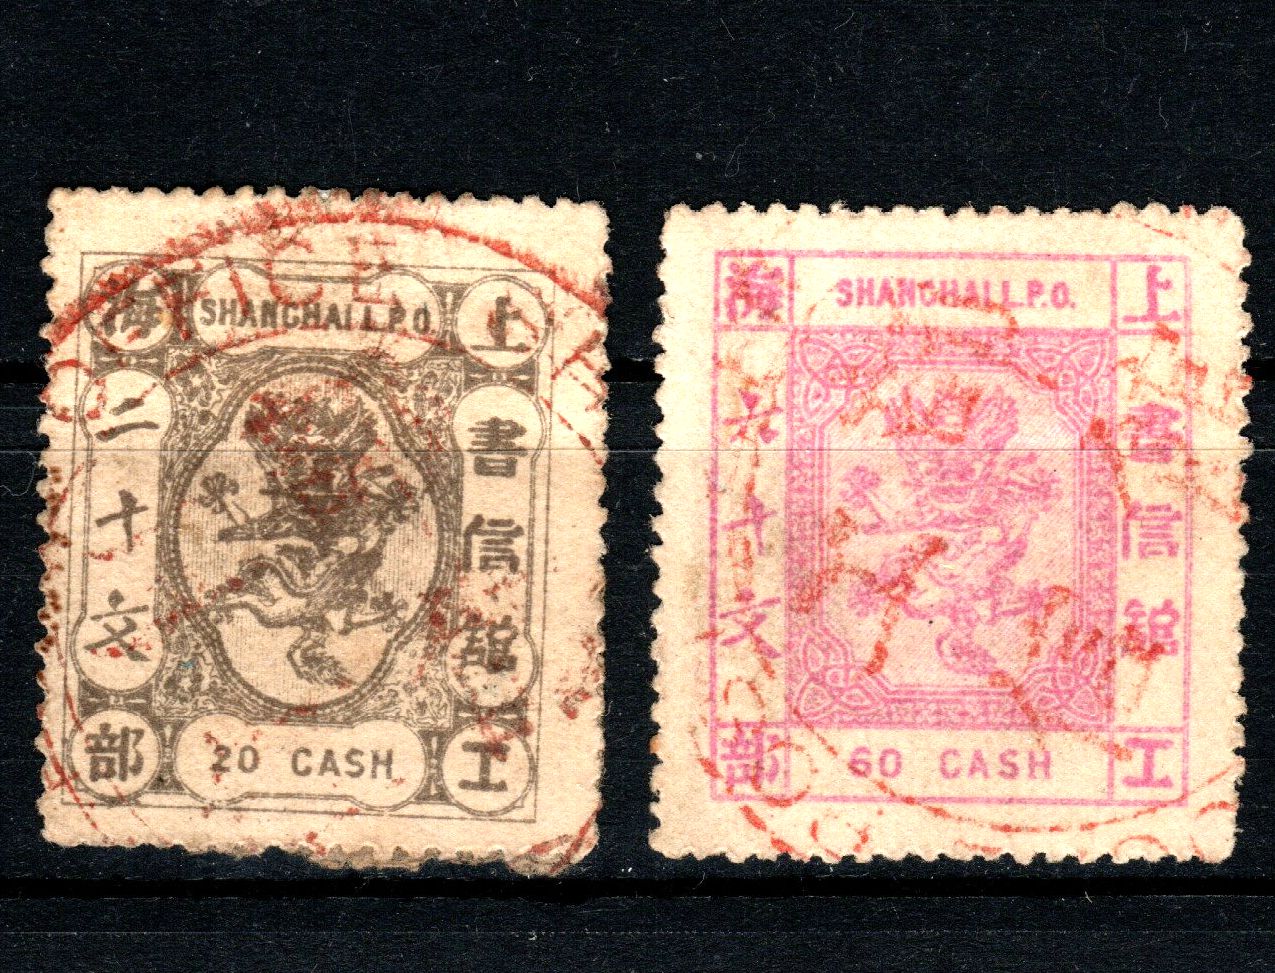 M1033, Shanghai Local Post Stamps, 8th Print Small Dragon, 2 pcs Cancelled, 1888